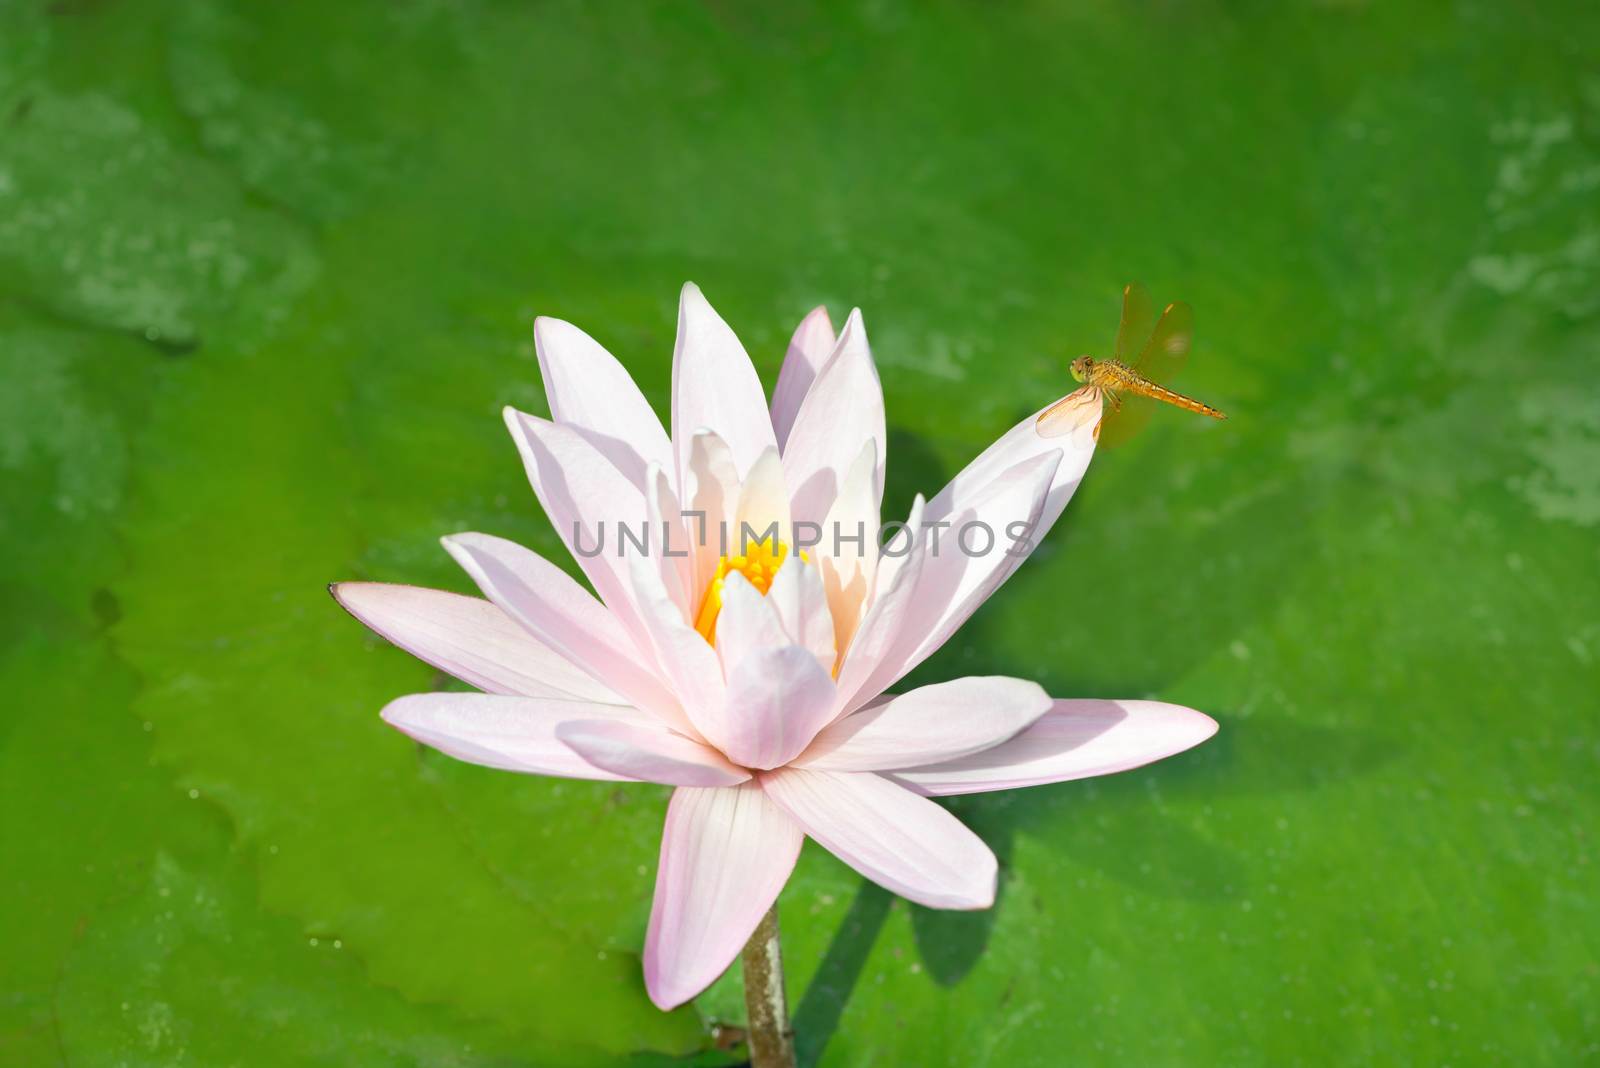 Dragonfly on a white lotus with green leaves on background